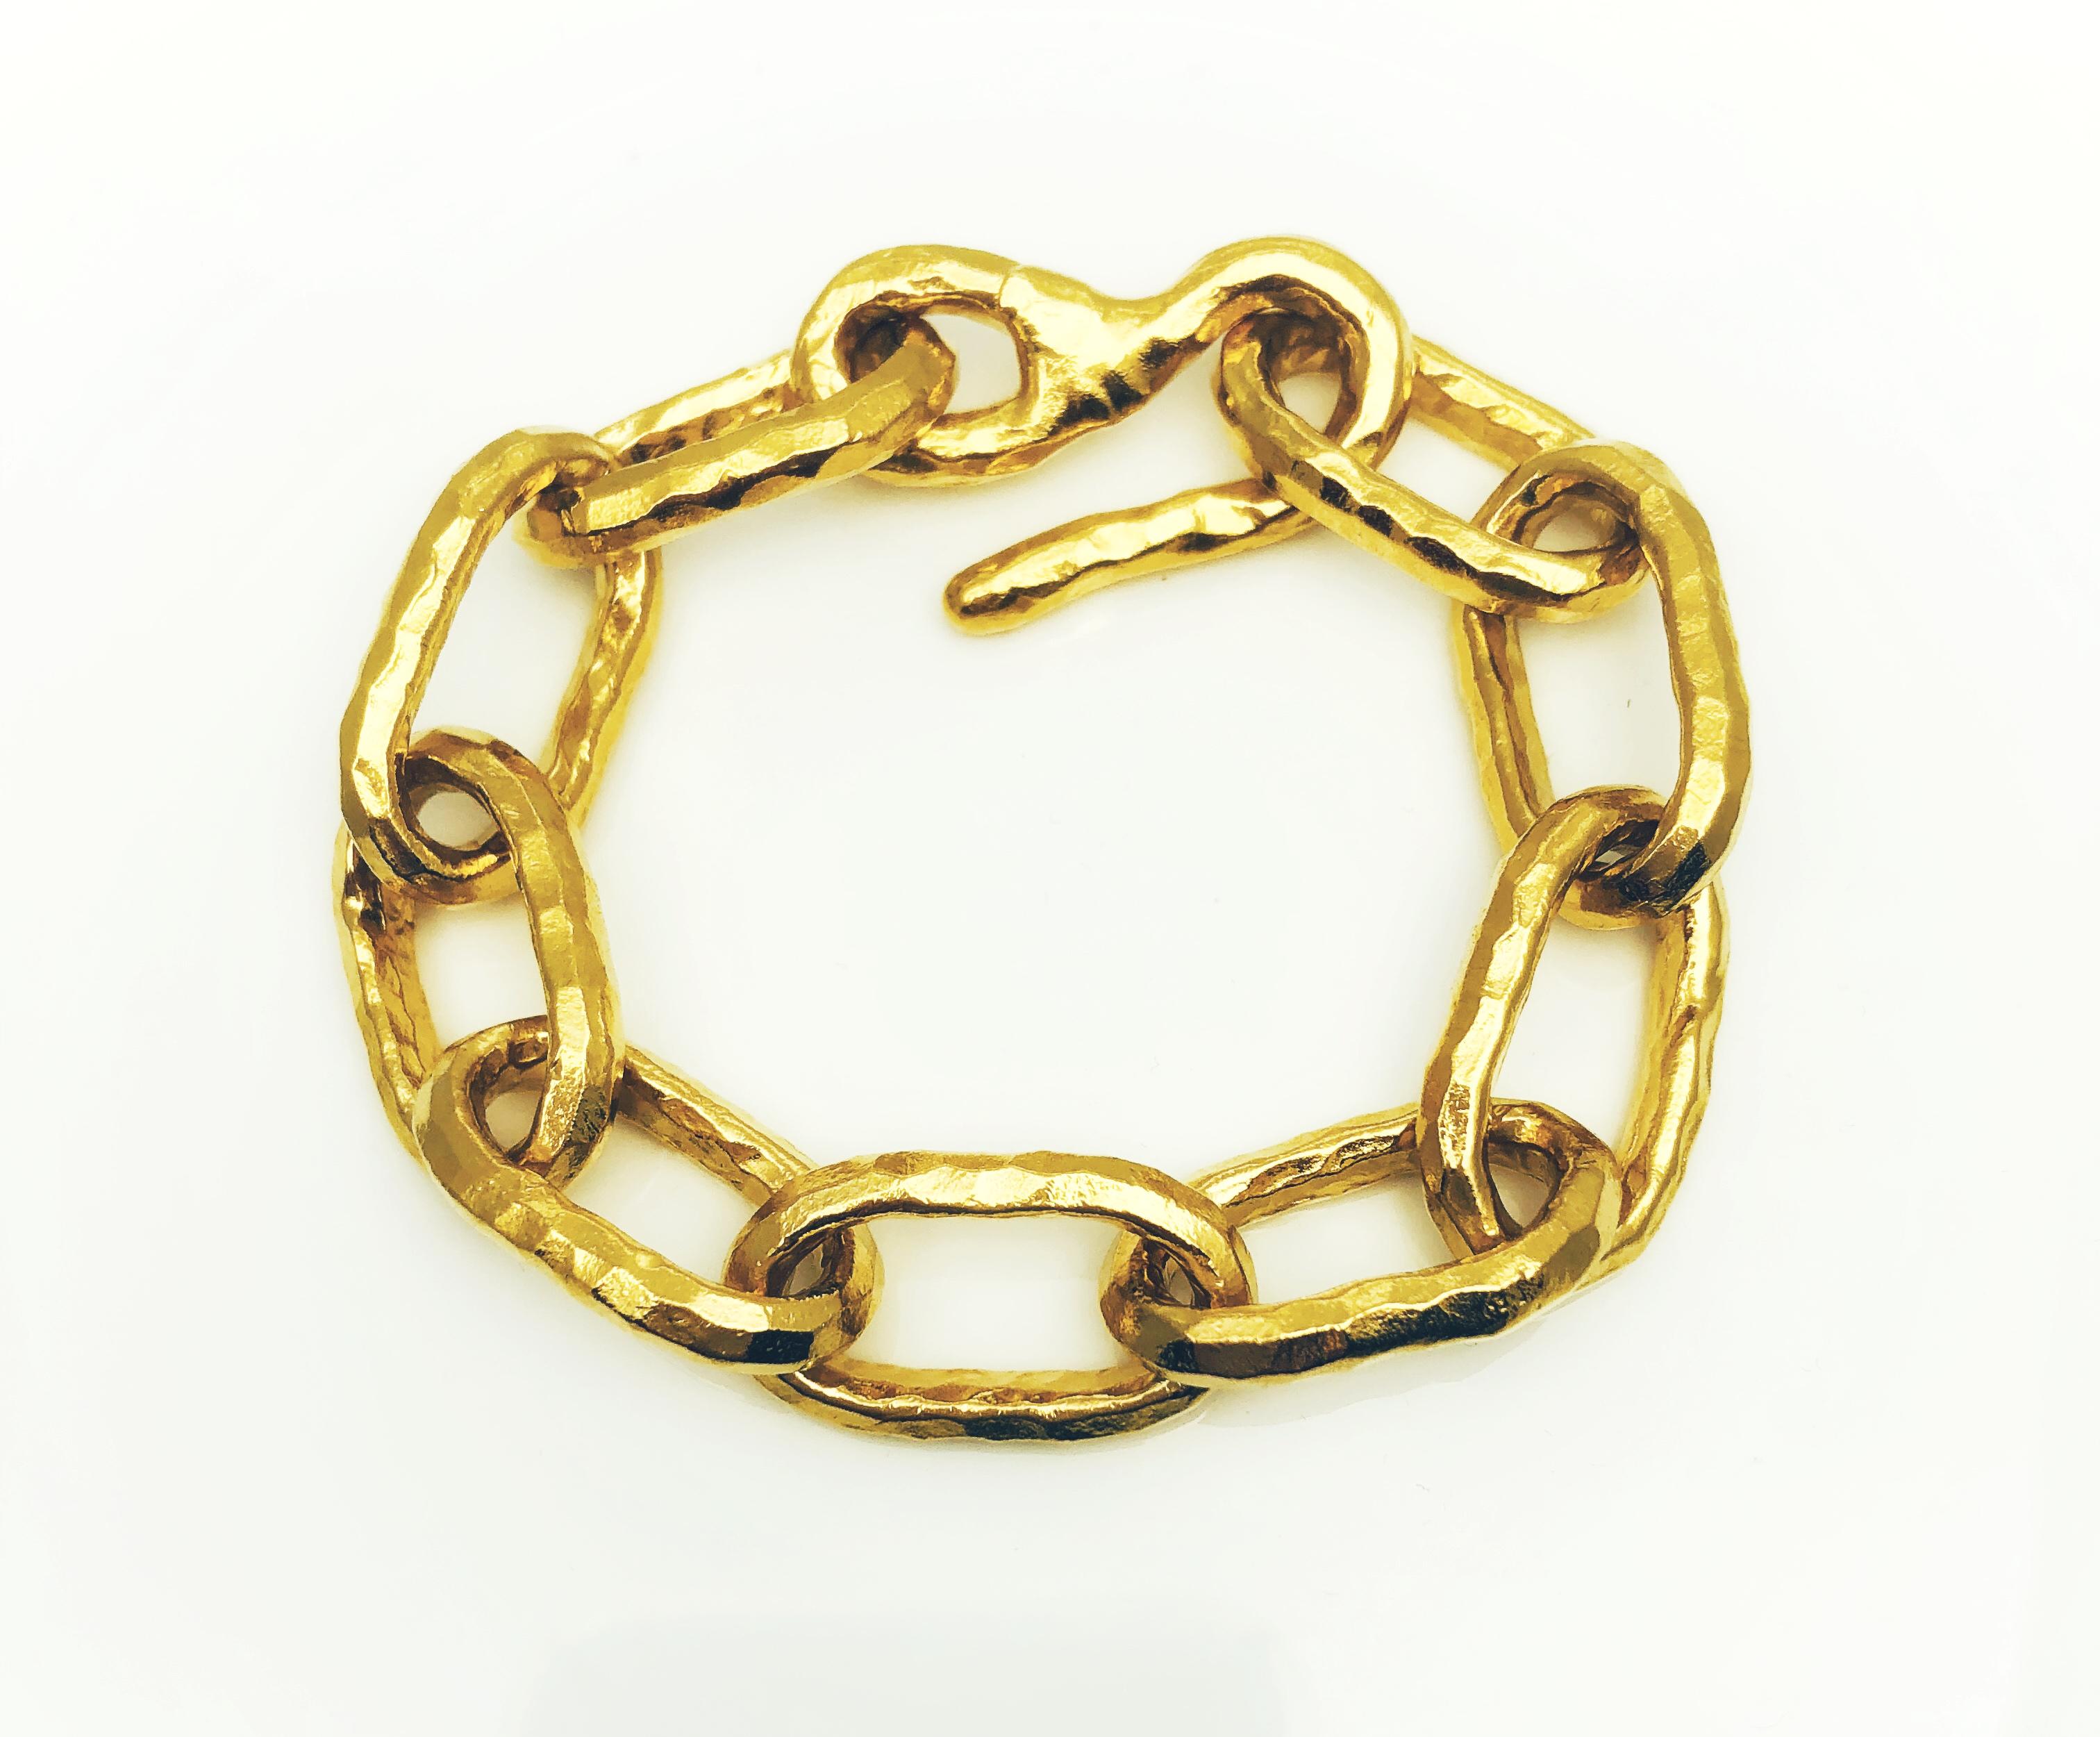 This Custom made Fashion Bracelet was designed by Jean mashie and is made of 22 Kt, hammered, yellow Gold. This 8 inch bracelet has oval shaped links and an 